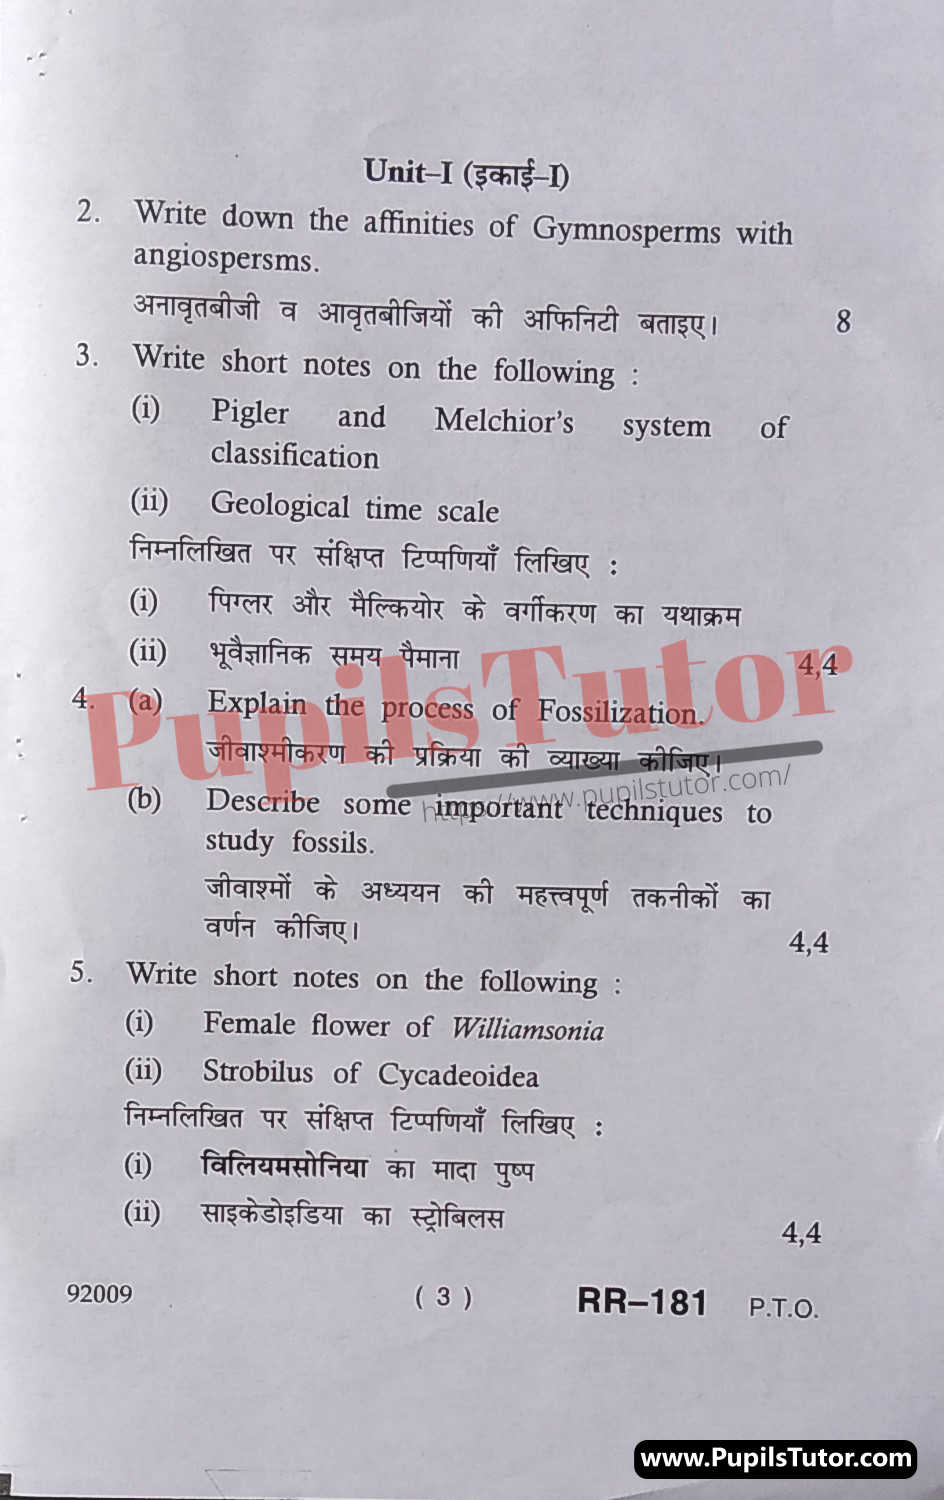 Free Download PDF Of M.D. University B.Sc. [Botany] Third Semester Latest Question Paper For Biology And Diversity Of Seed Plants Subject (Page 3) - https://www.pupilstutor.com